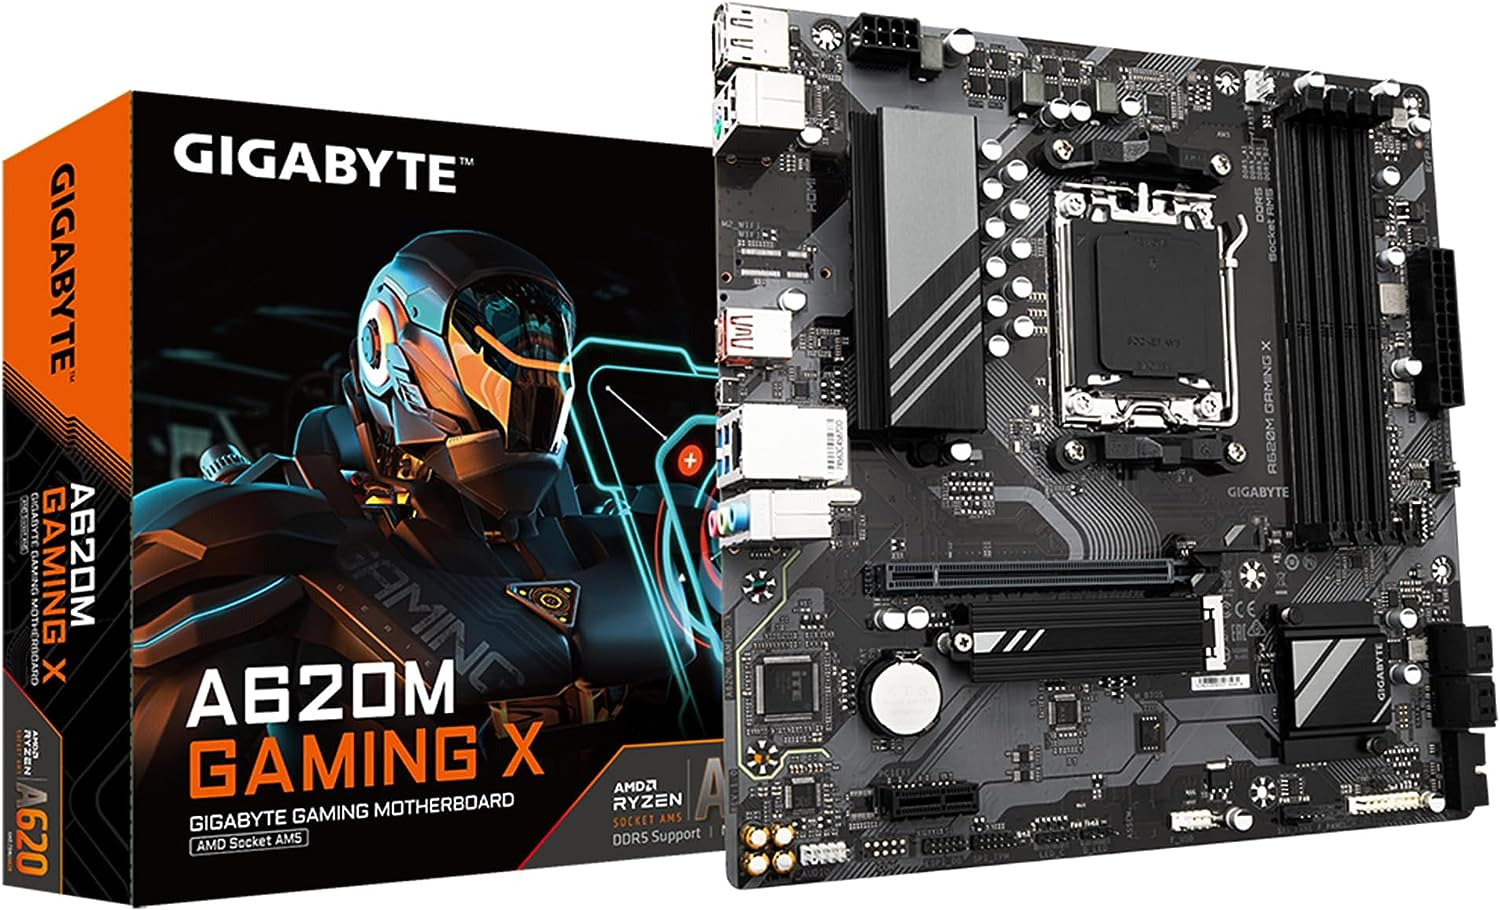 A620M Gaming X AMD A620 Micro ATX Motherboard with DDR5, Pcie 4.0, USB 3.2 Gen1X